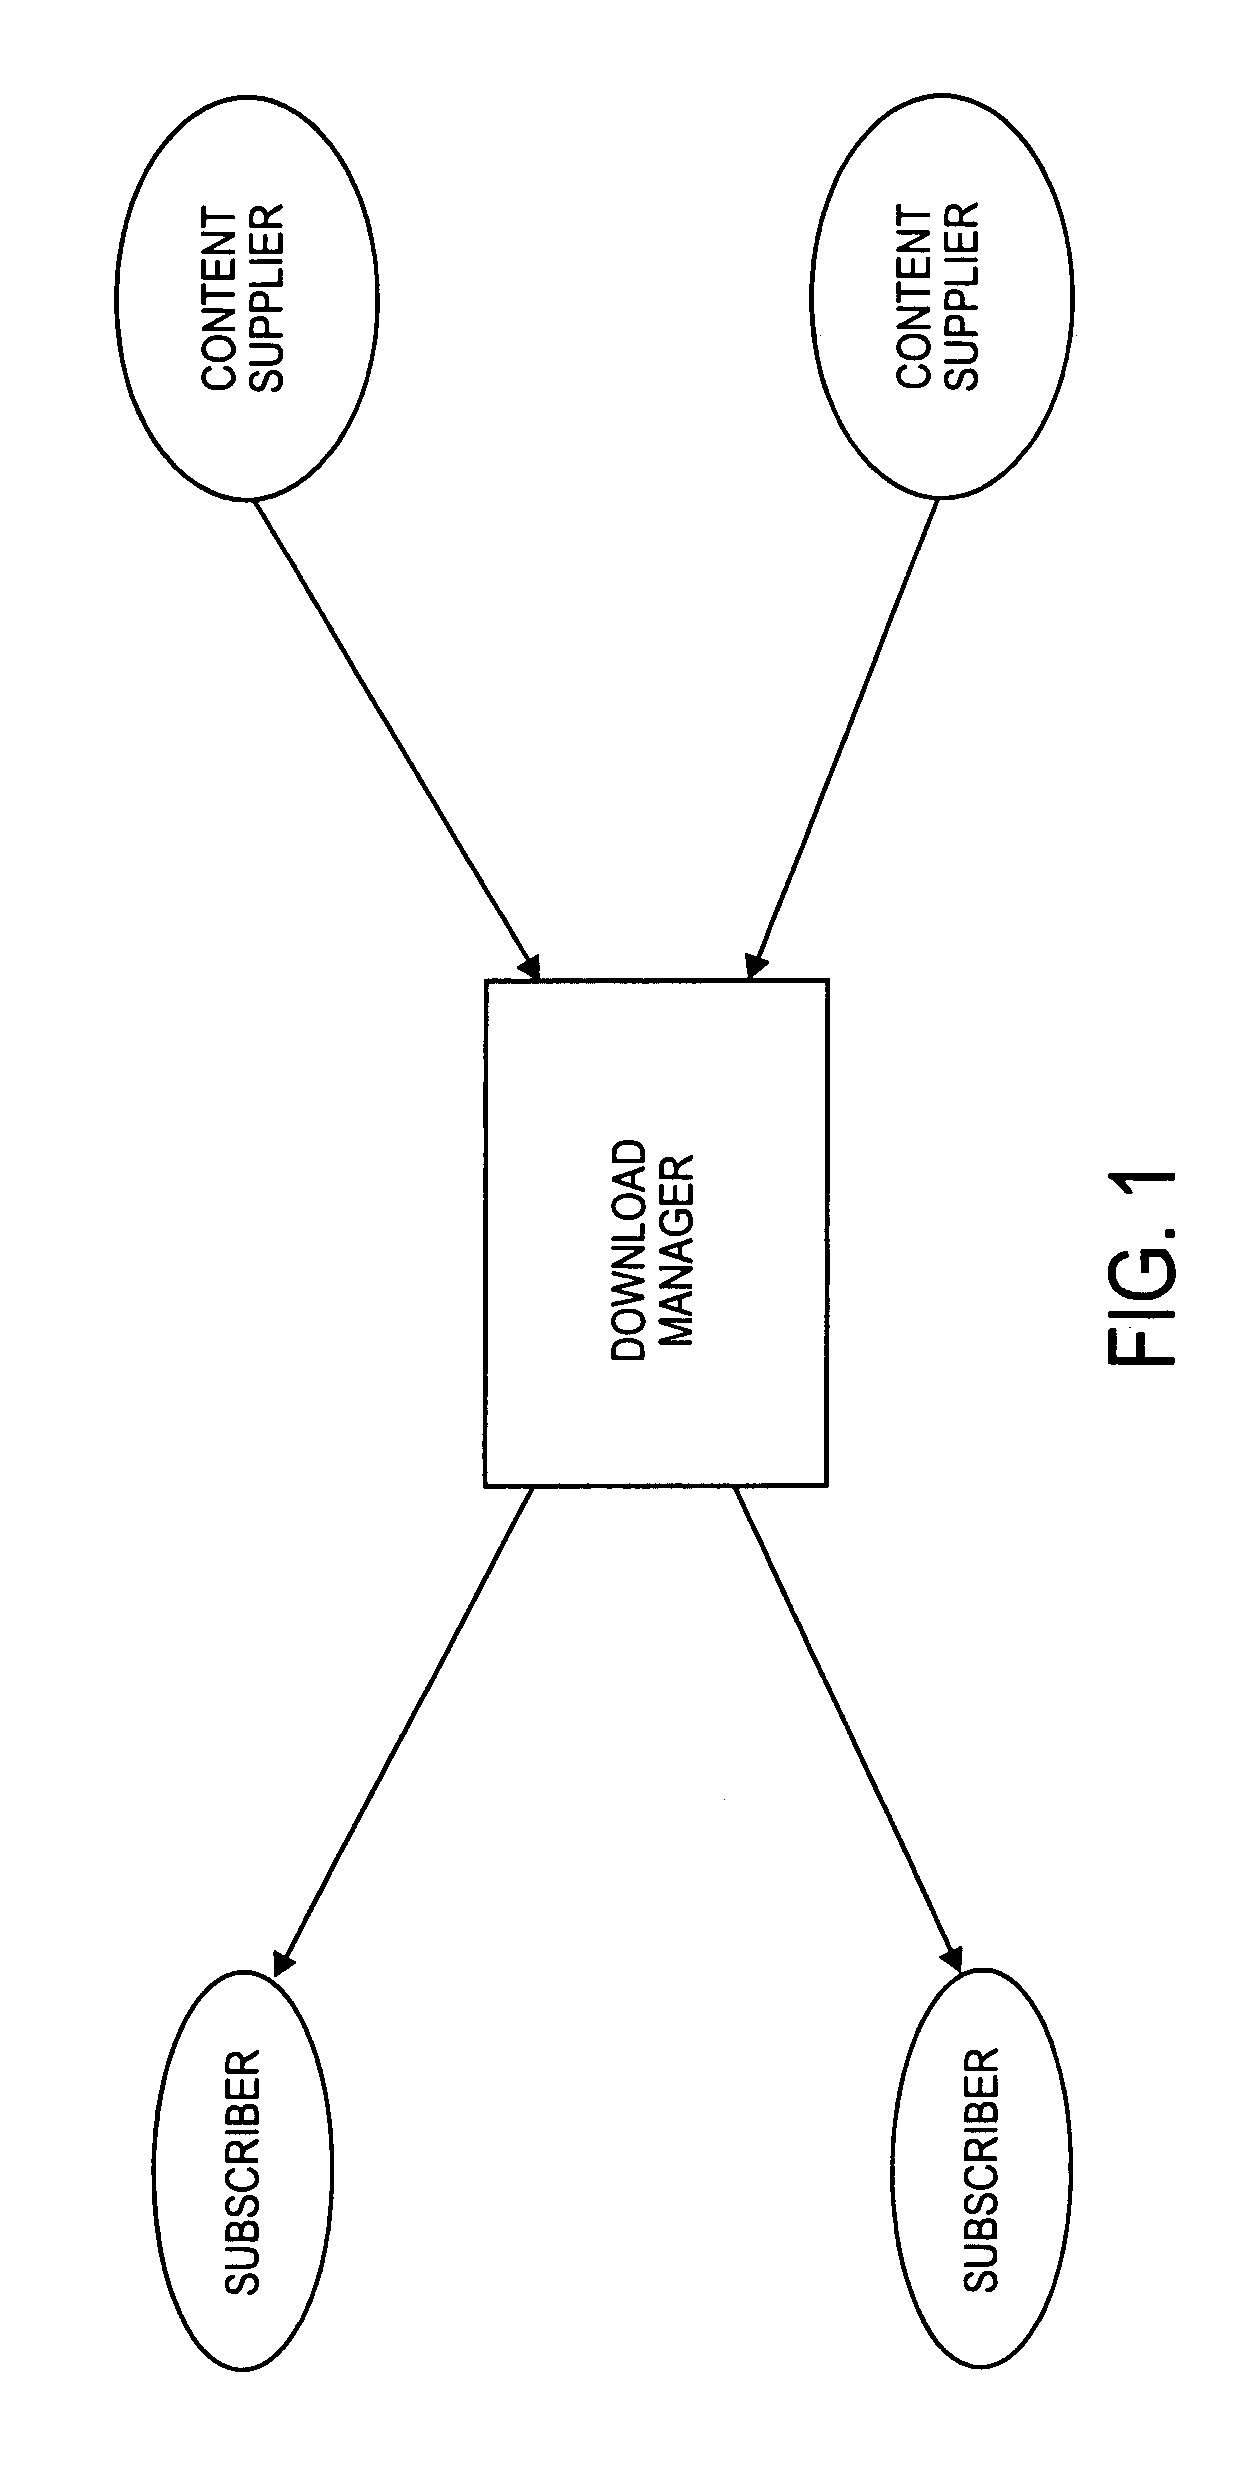 Device capability based discovery, packaging and provisioning of content for wireless mobile devices